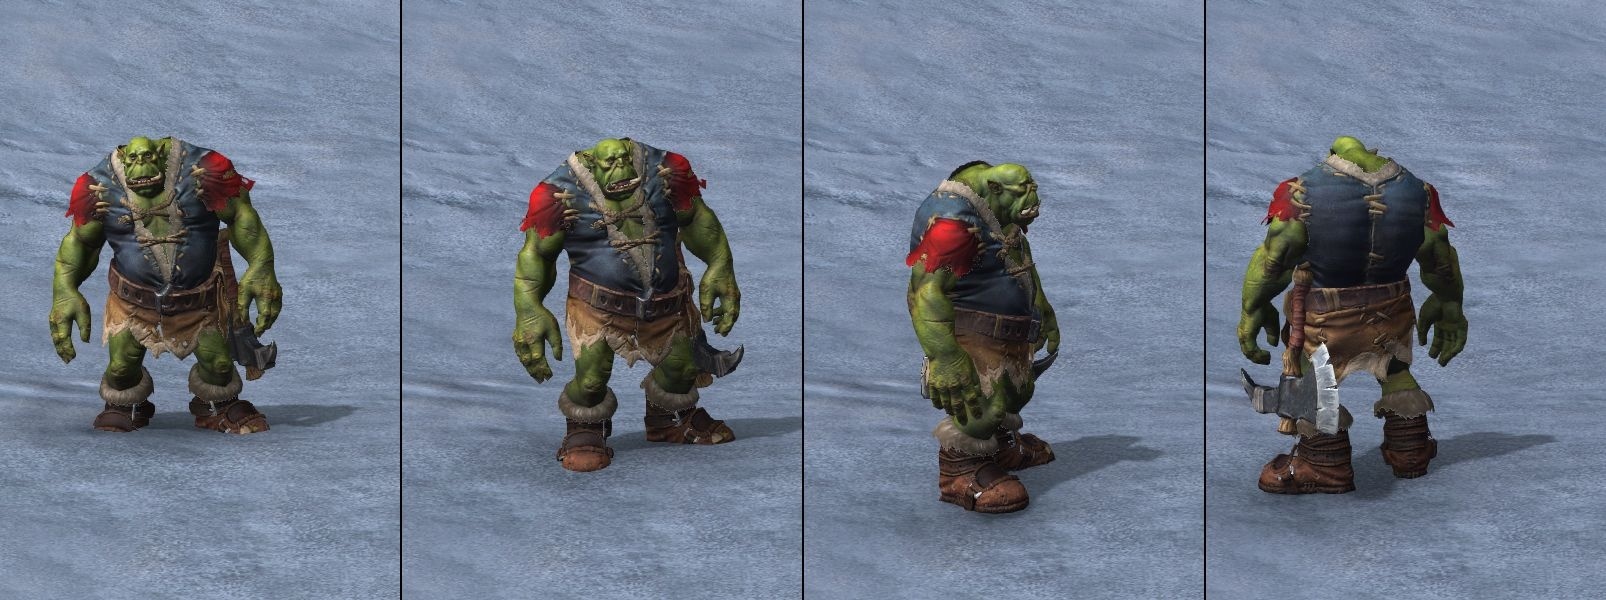 Warcraft 3 Reforged Orc Peon